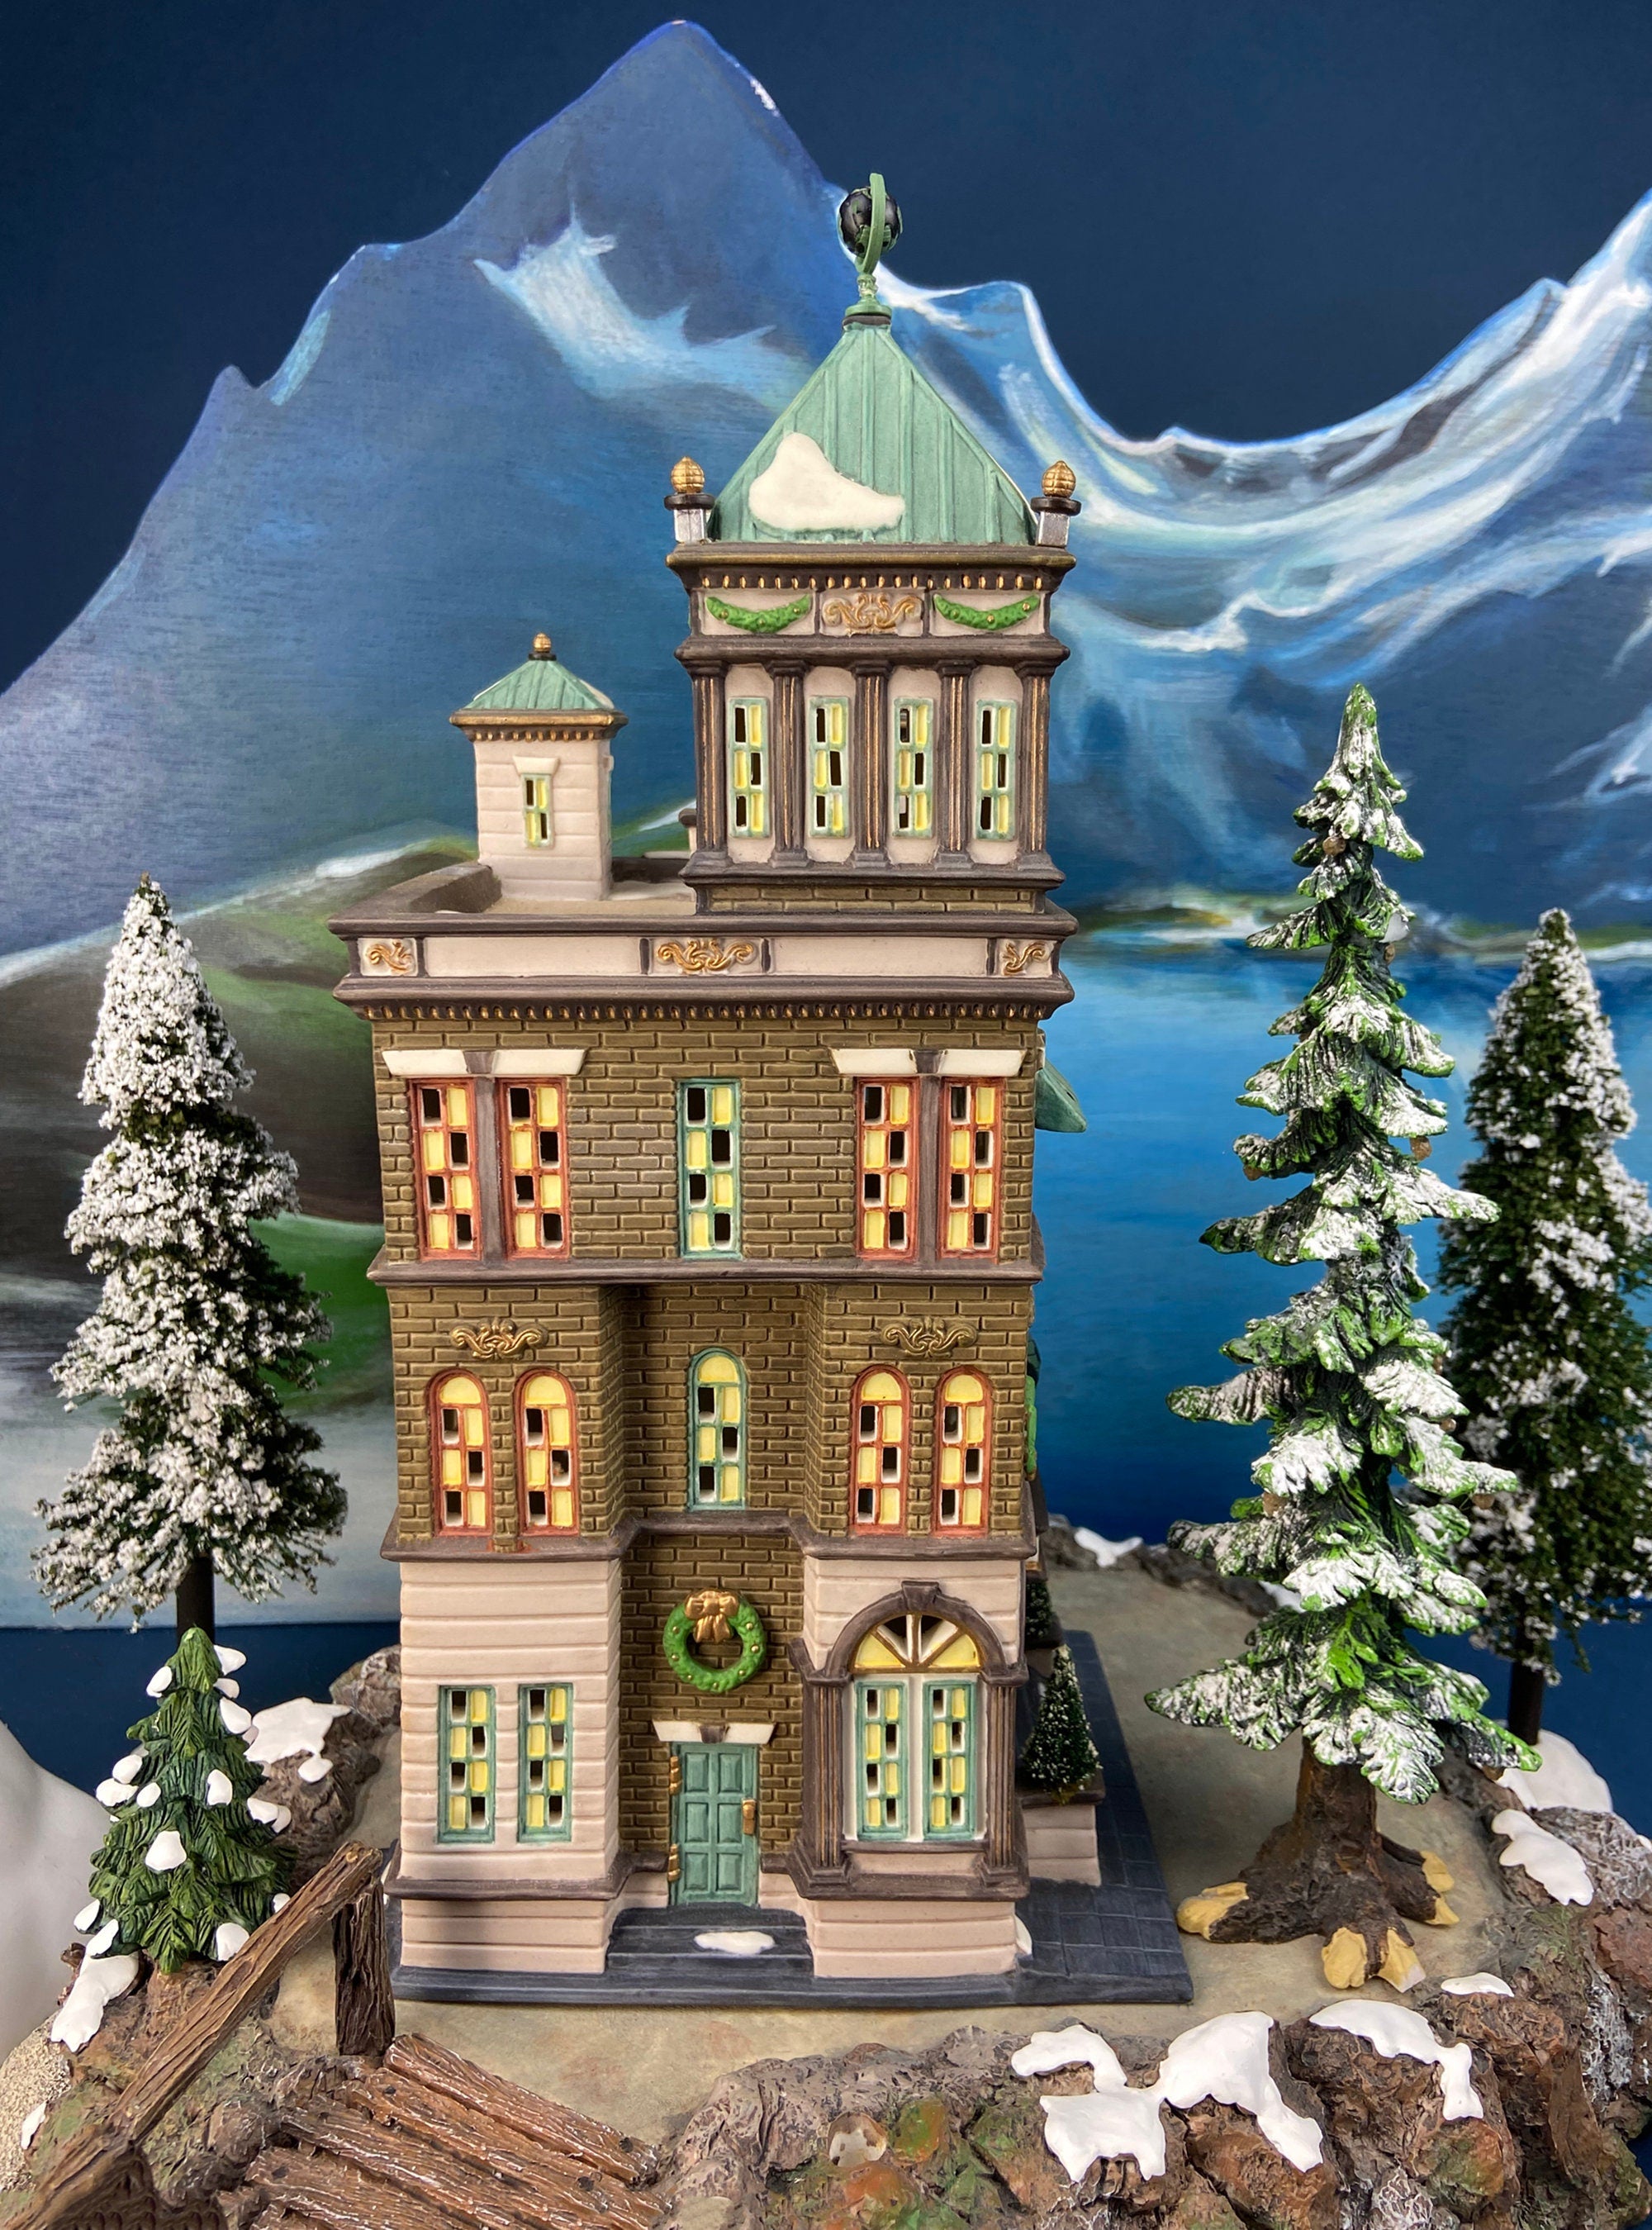 The City Globe Publishing by Department 56. Illuminated Christmas Vill –  Anything Discovered